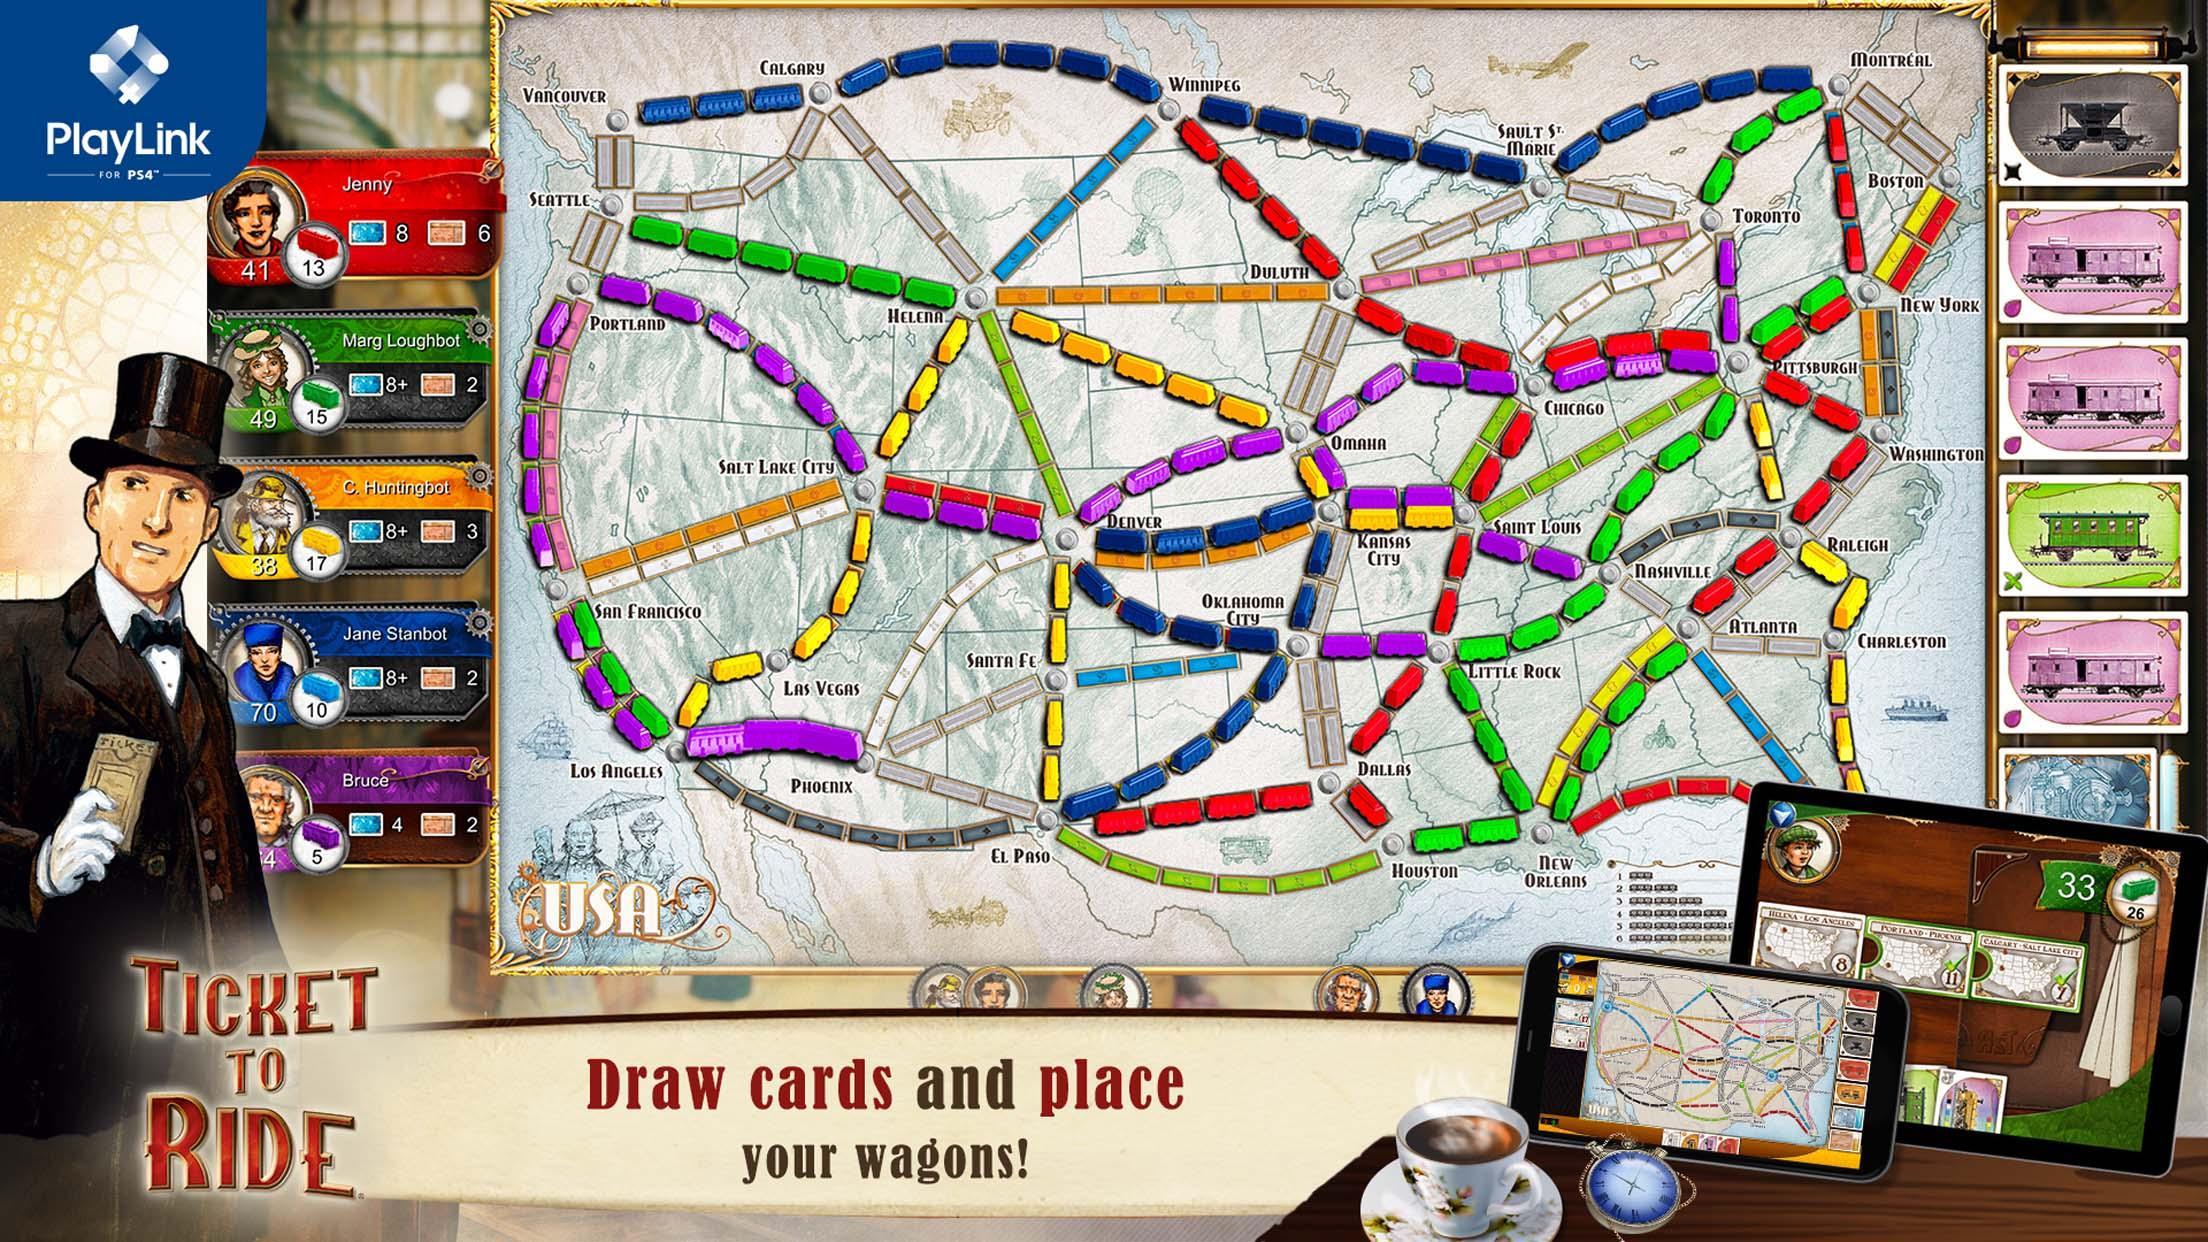 Ticket to Ride for PlayLink 2.7.2-6472-ceb1ea16 Screenshot 3